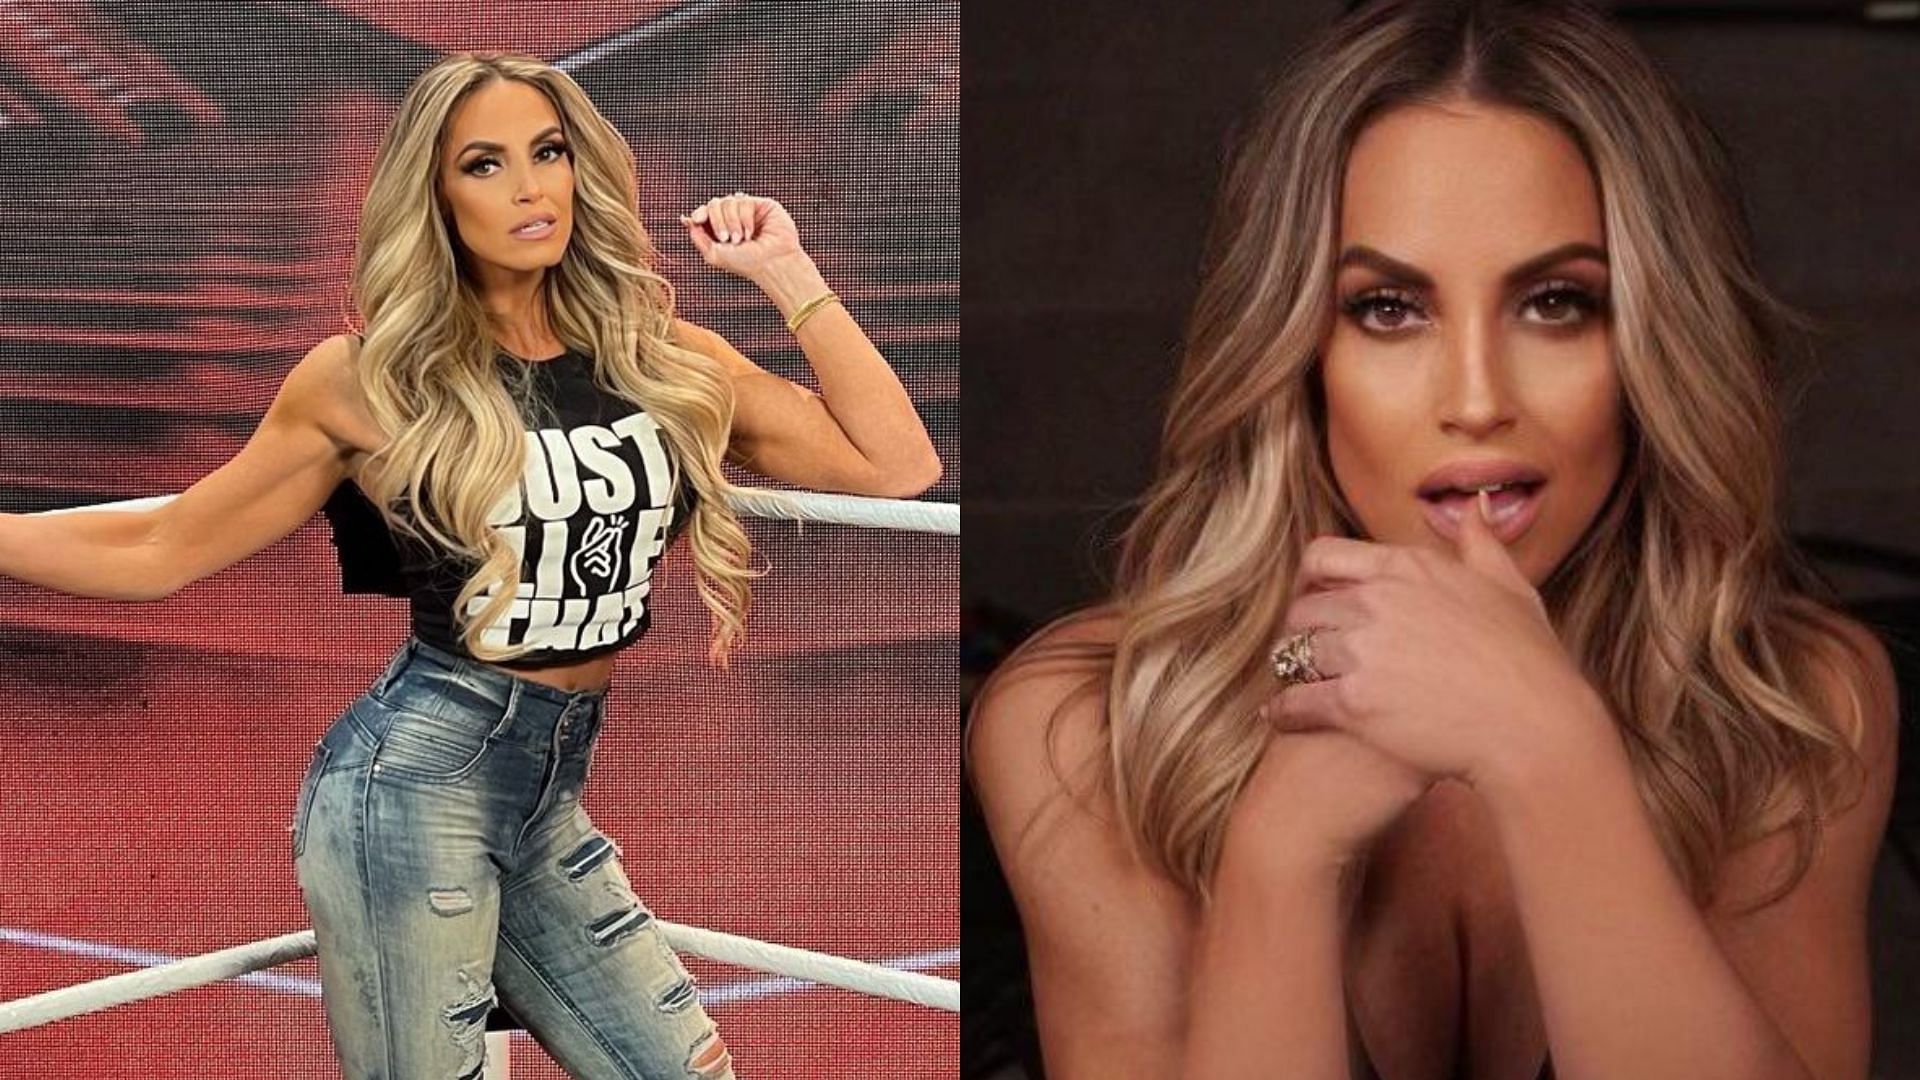 Trish Stratus will feature in a singles match on RAW